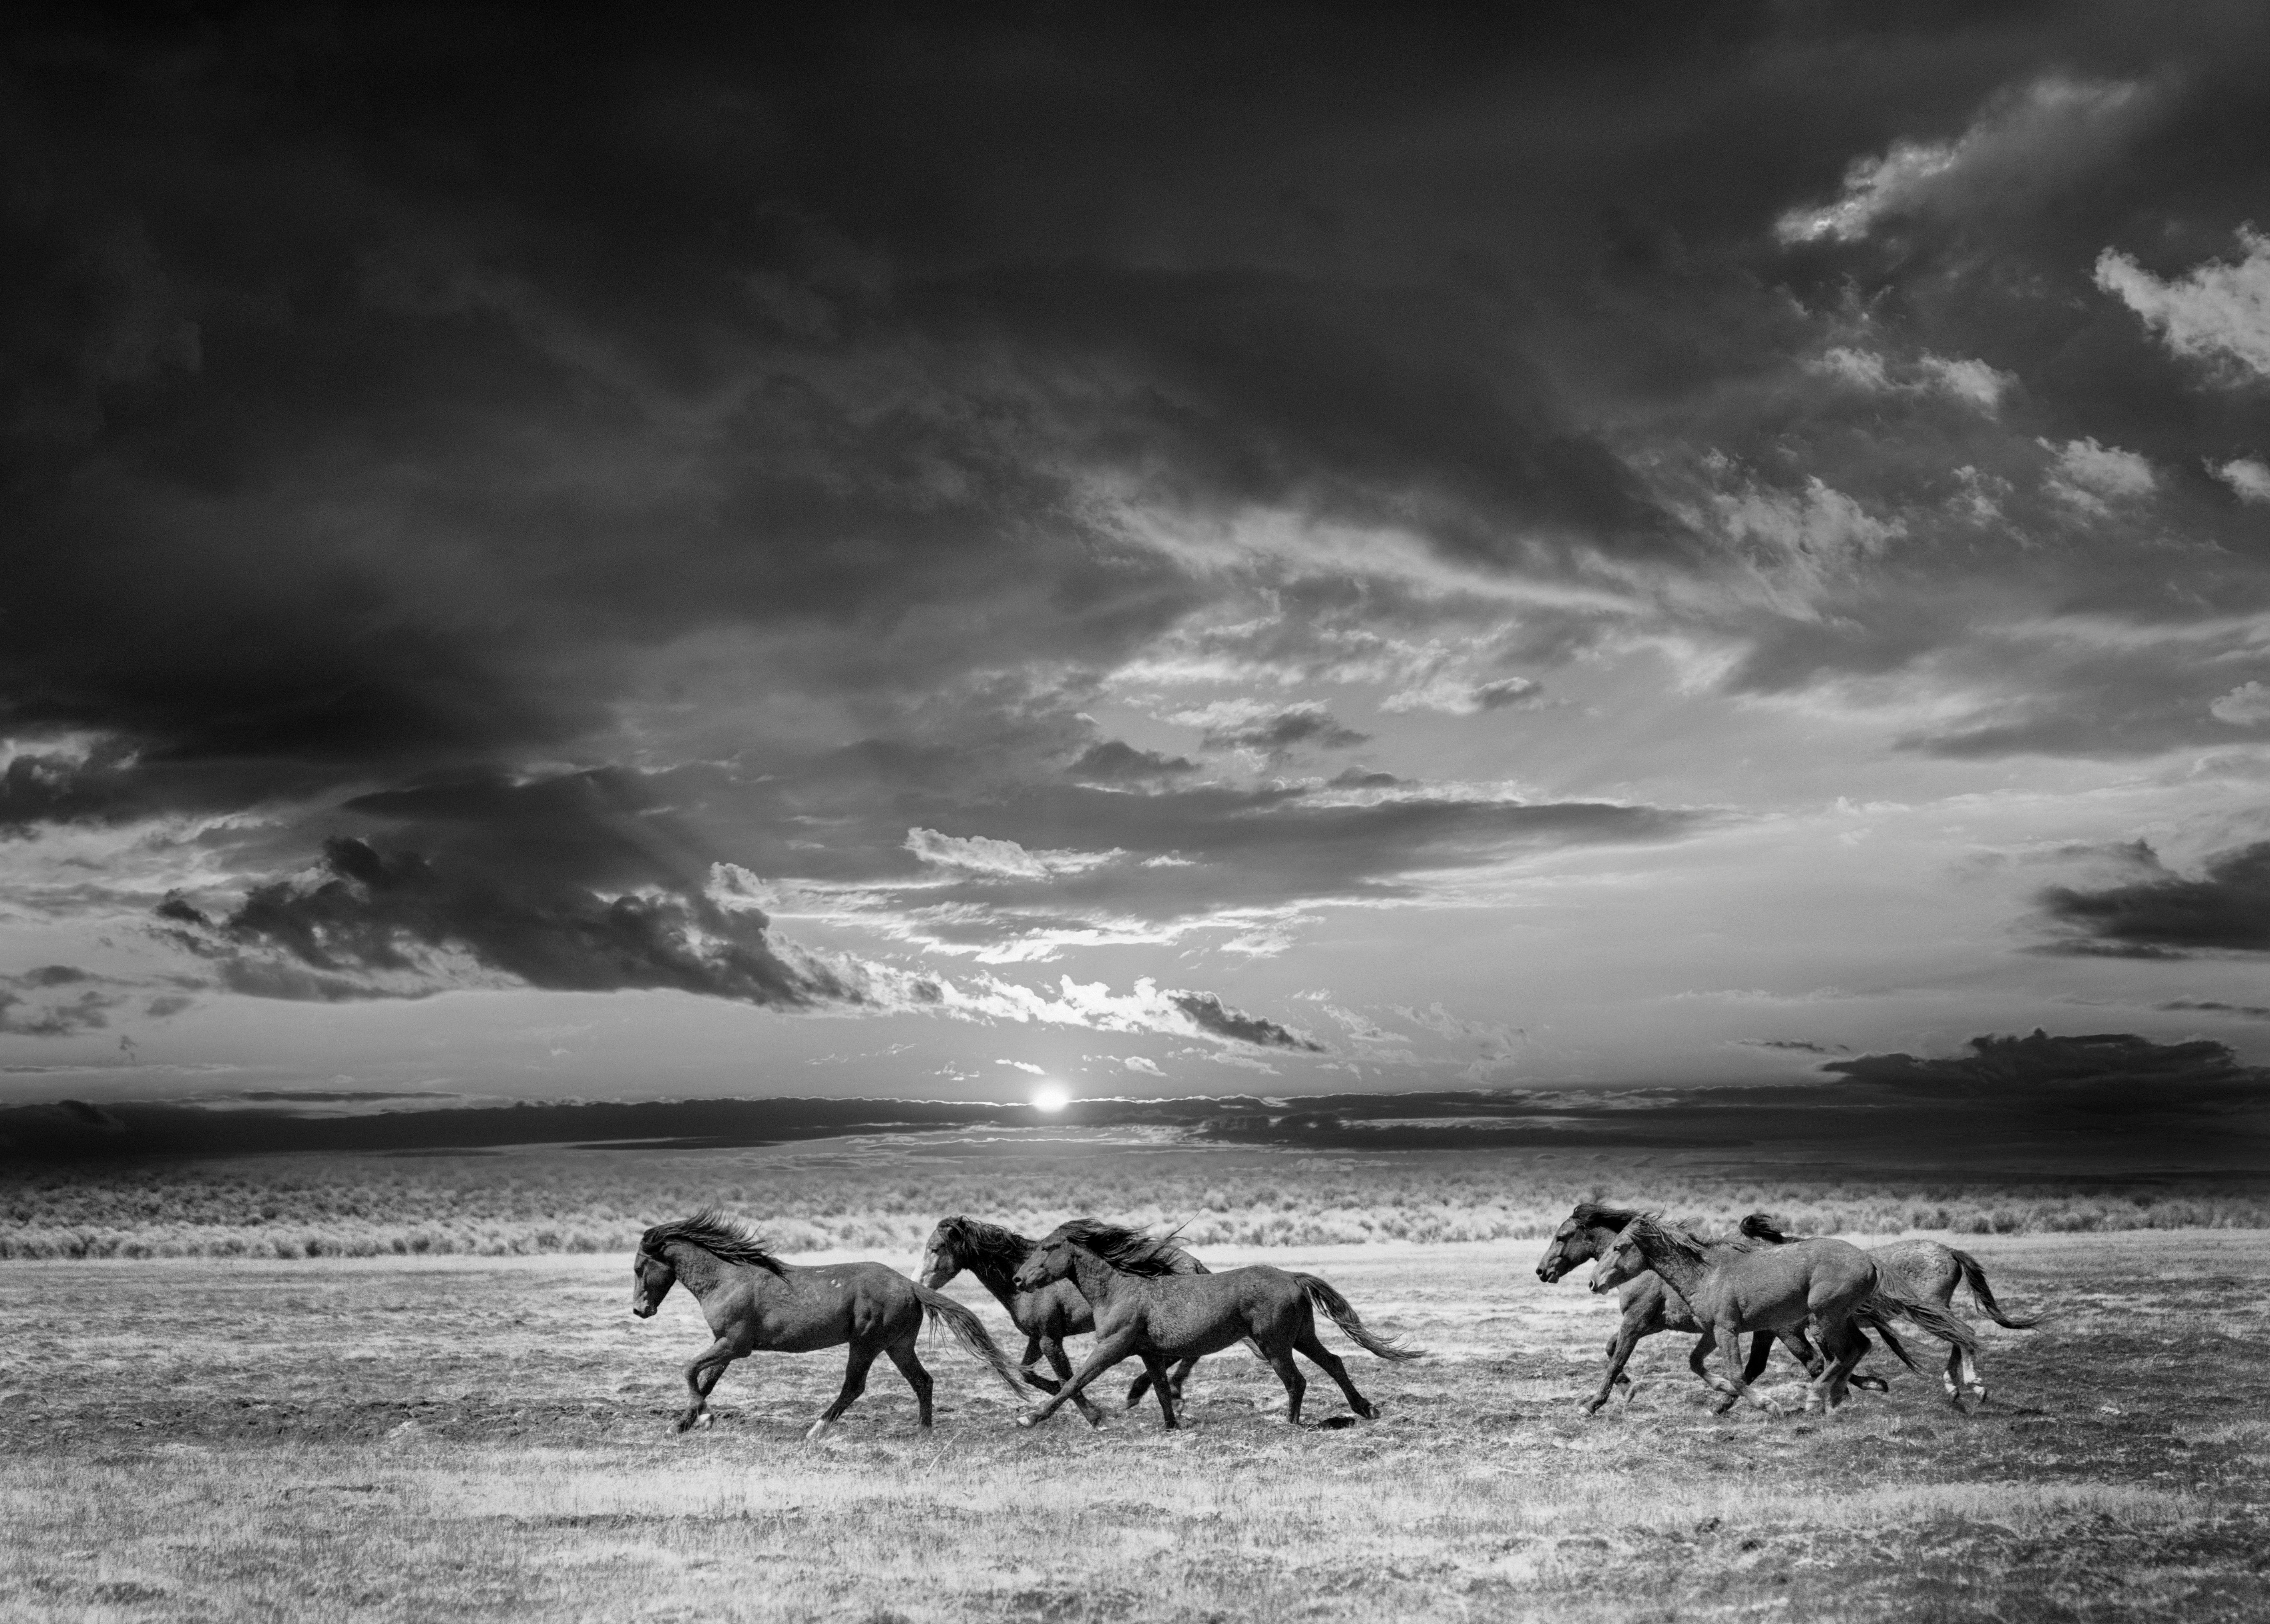 Black and White Photograph Shane Russeck - Chasing the Light- 28x40 Black & White Photography Wild Horses Mustangs Signé